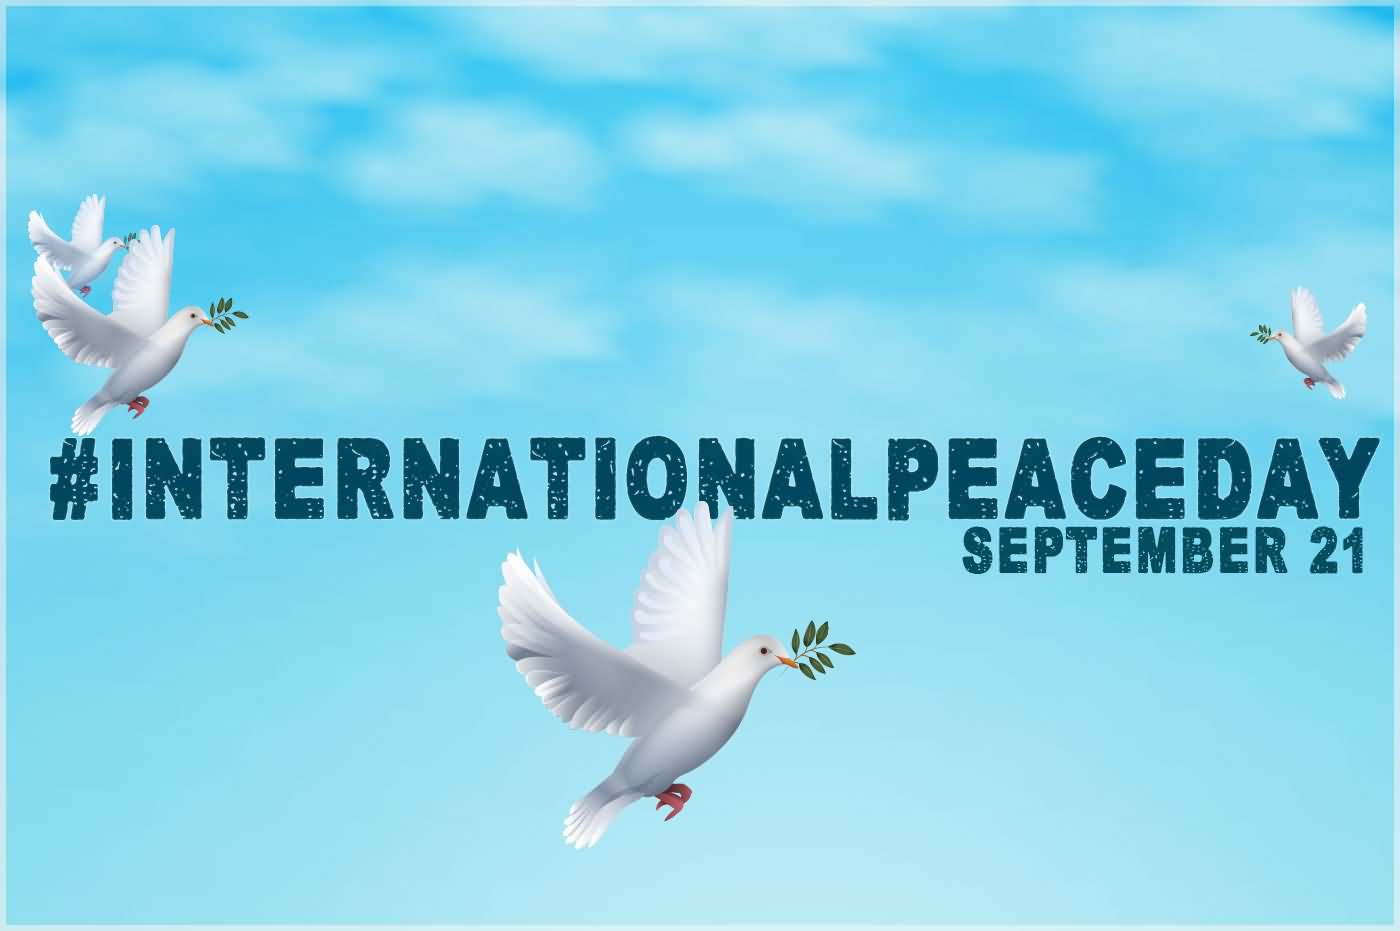 International Peace Day September 21 Flying Doves With Olive Branch In Mouth